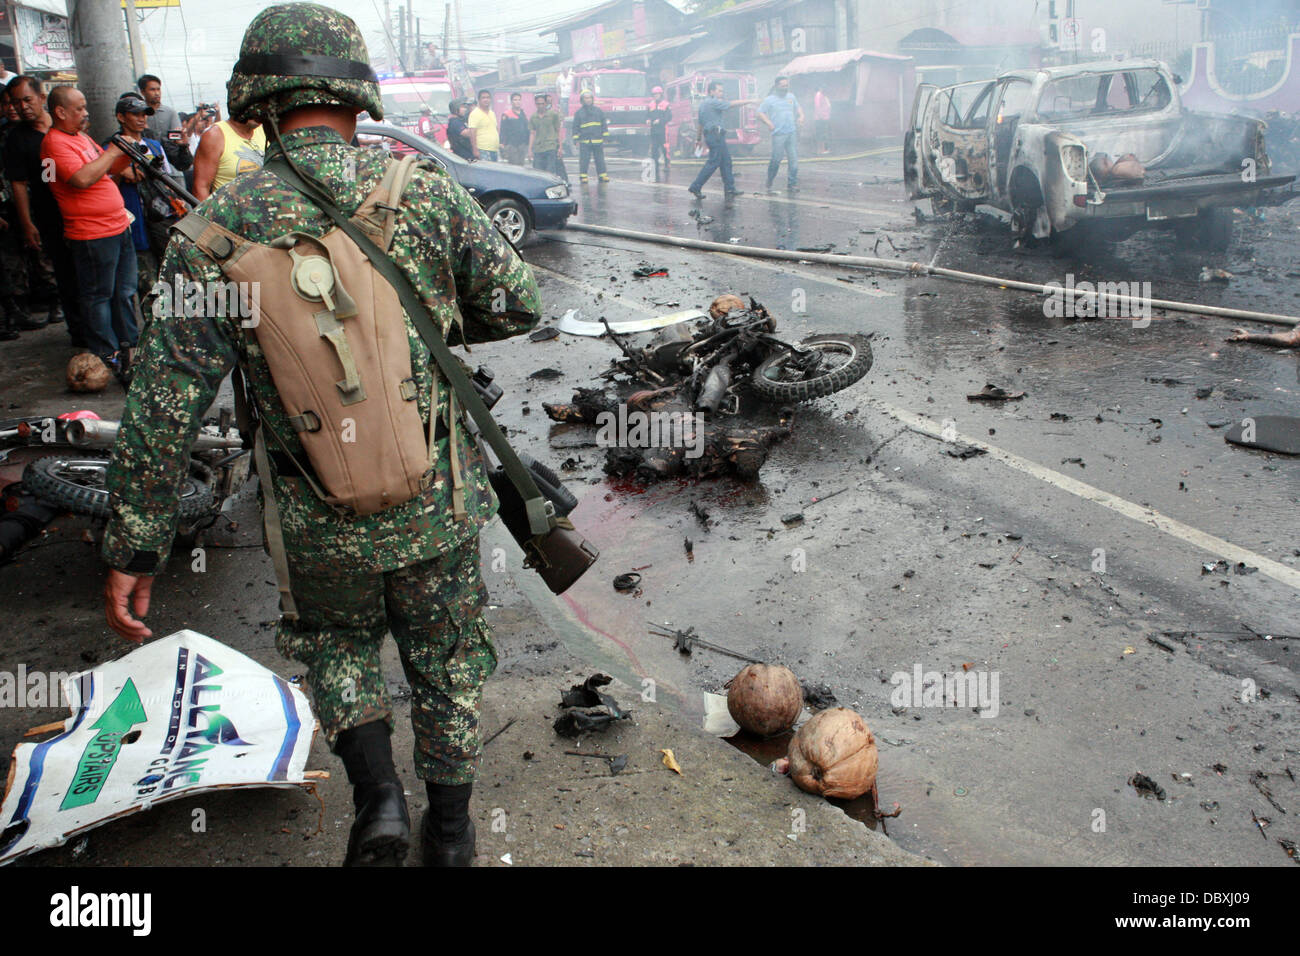 Cotabato, Philippines. 5th Aug, 2013. Bodies lay burnt in the street following a deadly car bomb explosion in the busy street of southern Philippine city of Cotabato. The deadly blast killed at least six people and wounded 29. It detonated as a car passed carrying a local official, who escaped unhurt. It was not clear if she was the target. Cotabato is on the island of Mindanao, which has been racked by a 40-year conflict between government forces and Islamist rebels. It is the second deadly bombing on Mindanao in 10 days. Stock Photo